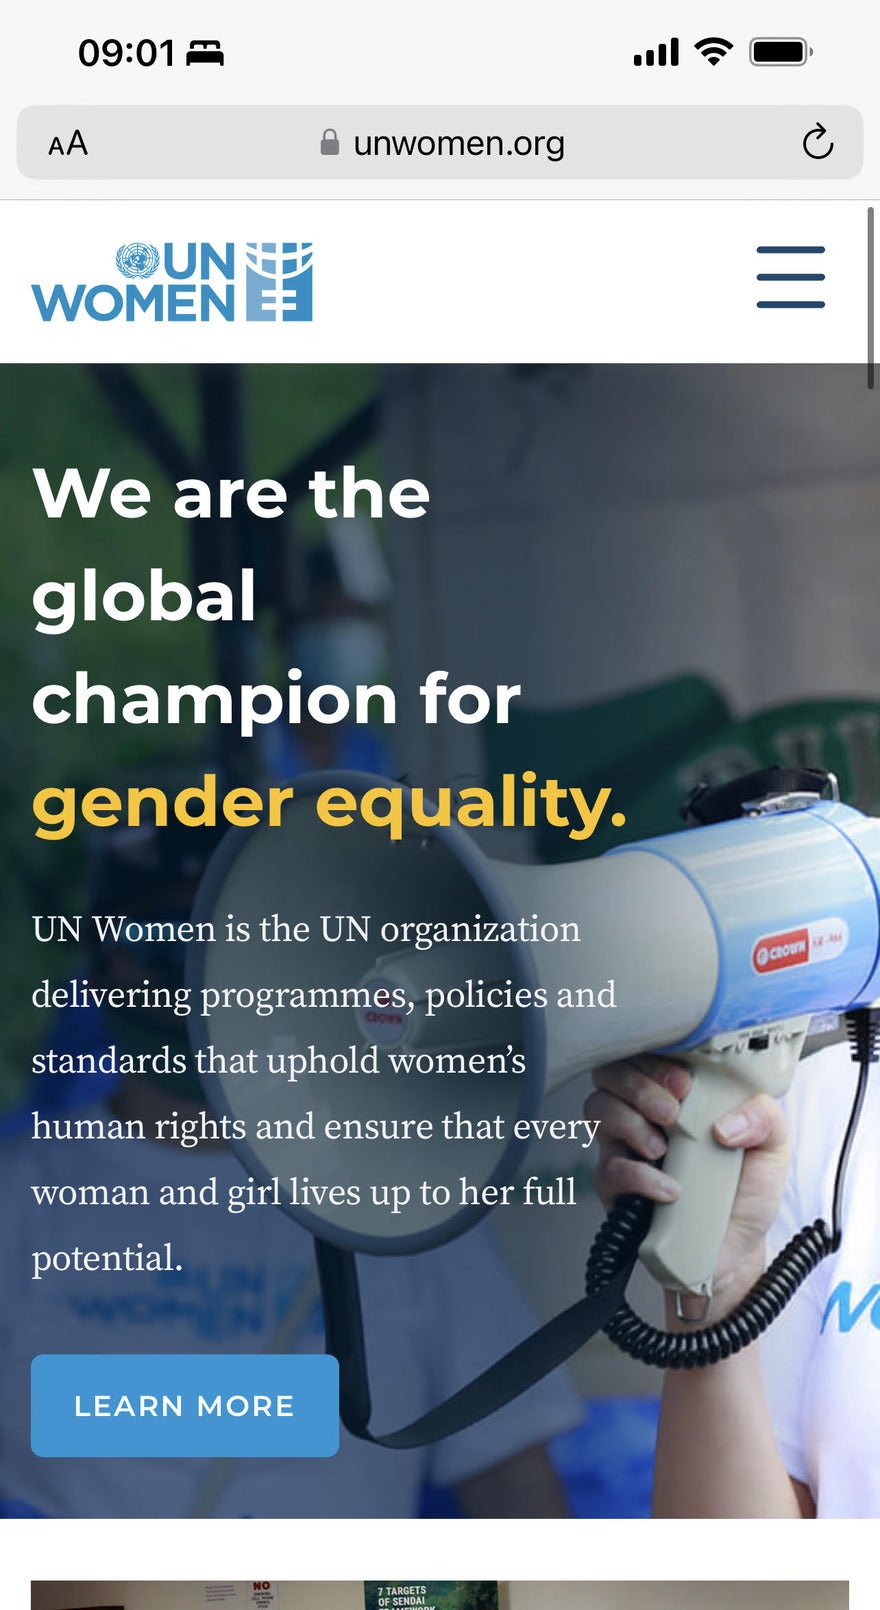 A screenshot of UN Women's mobile site, with one image of a hand holding up a bullhorn and a title saying "We are a global champion for gender equality."